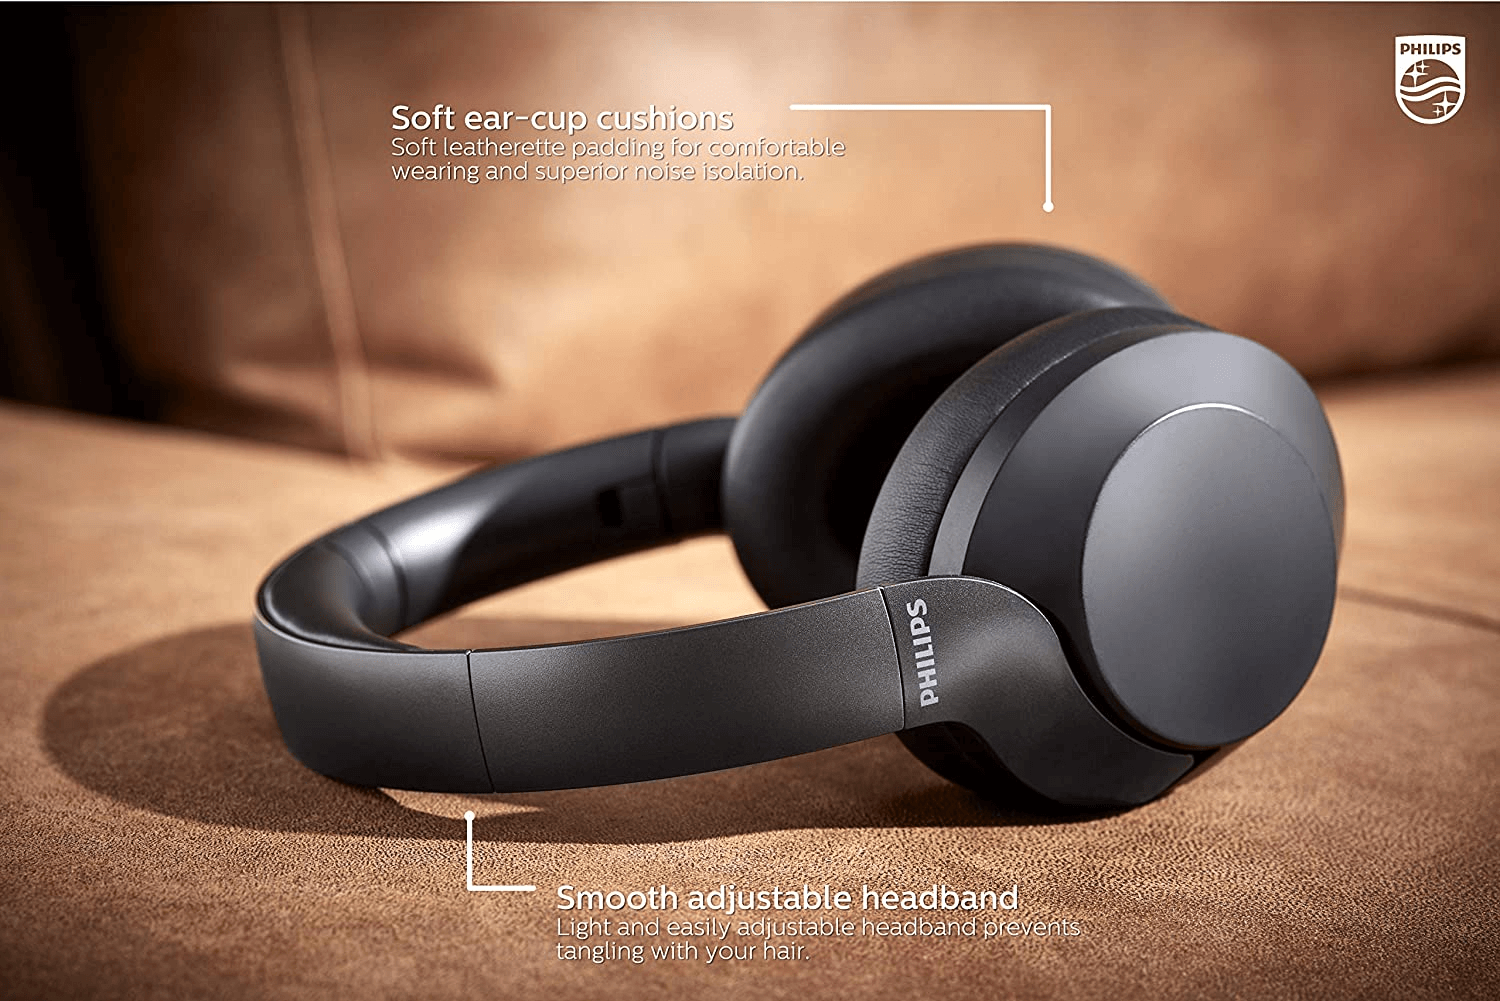 Bliss out with quality Bluetooth noise-canceling cans on sale for Prime Day 148af451 769d 4e74 97ba 2391d2e50140 1